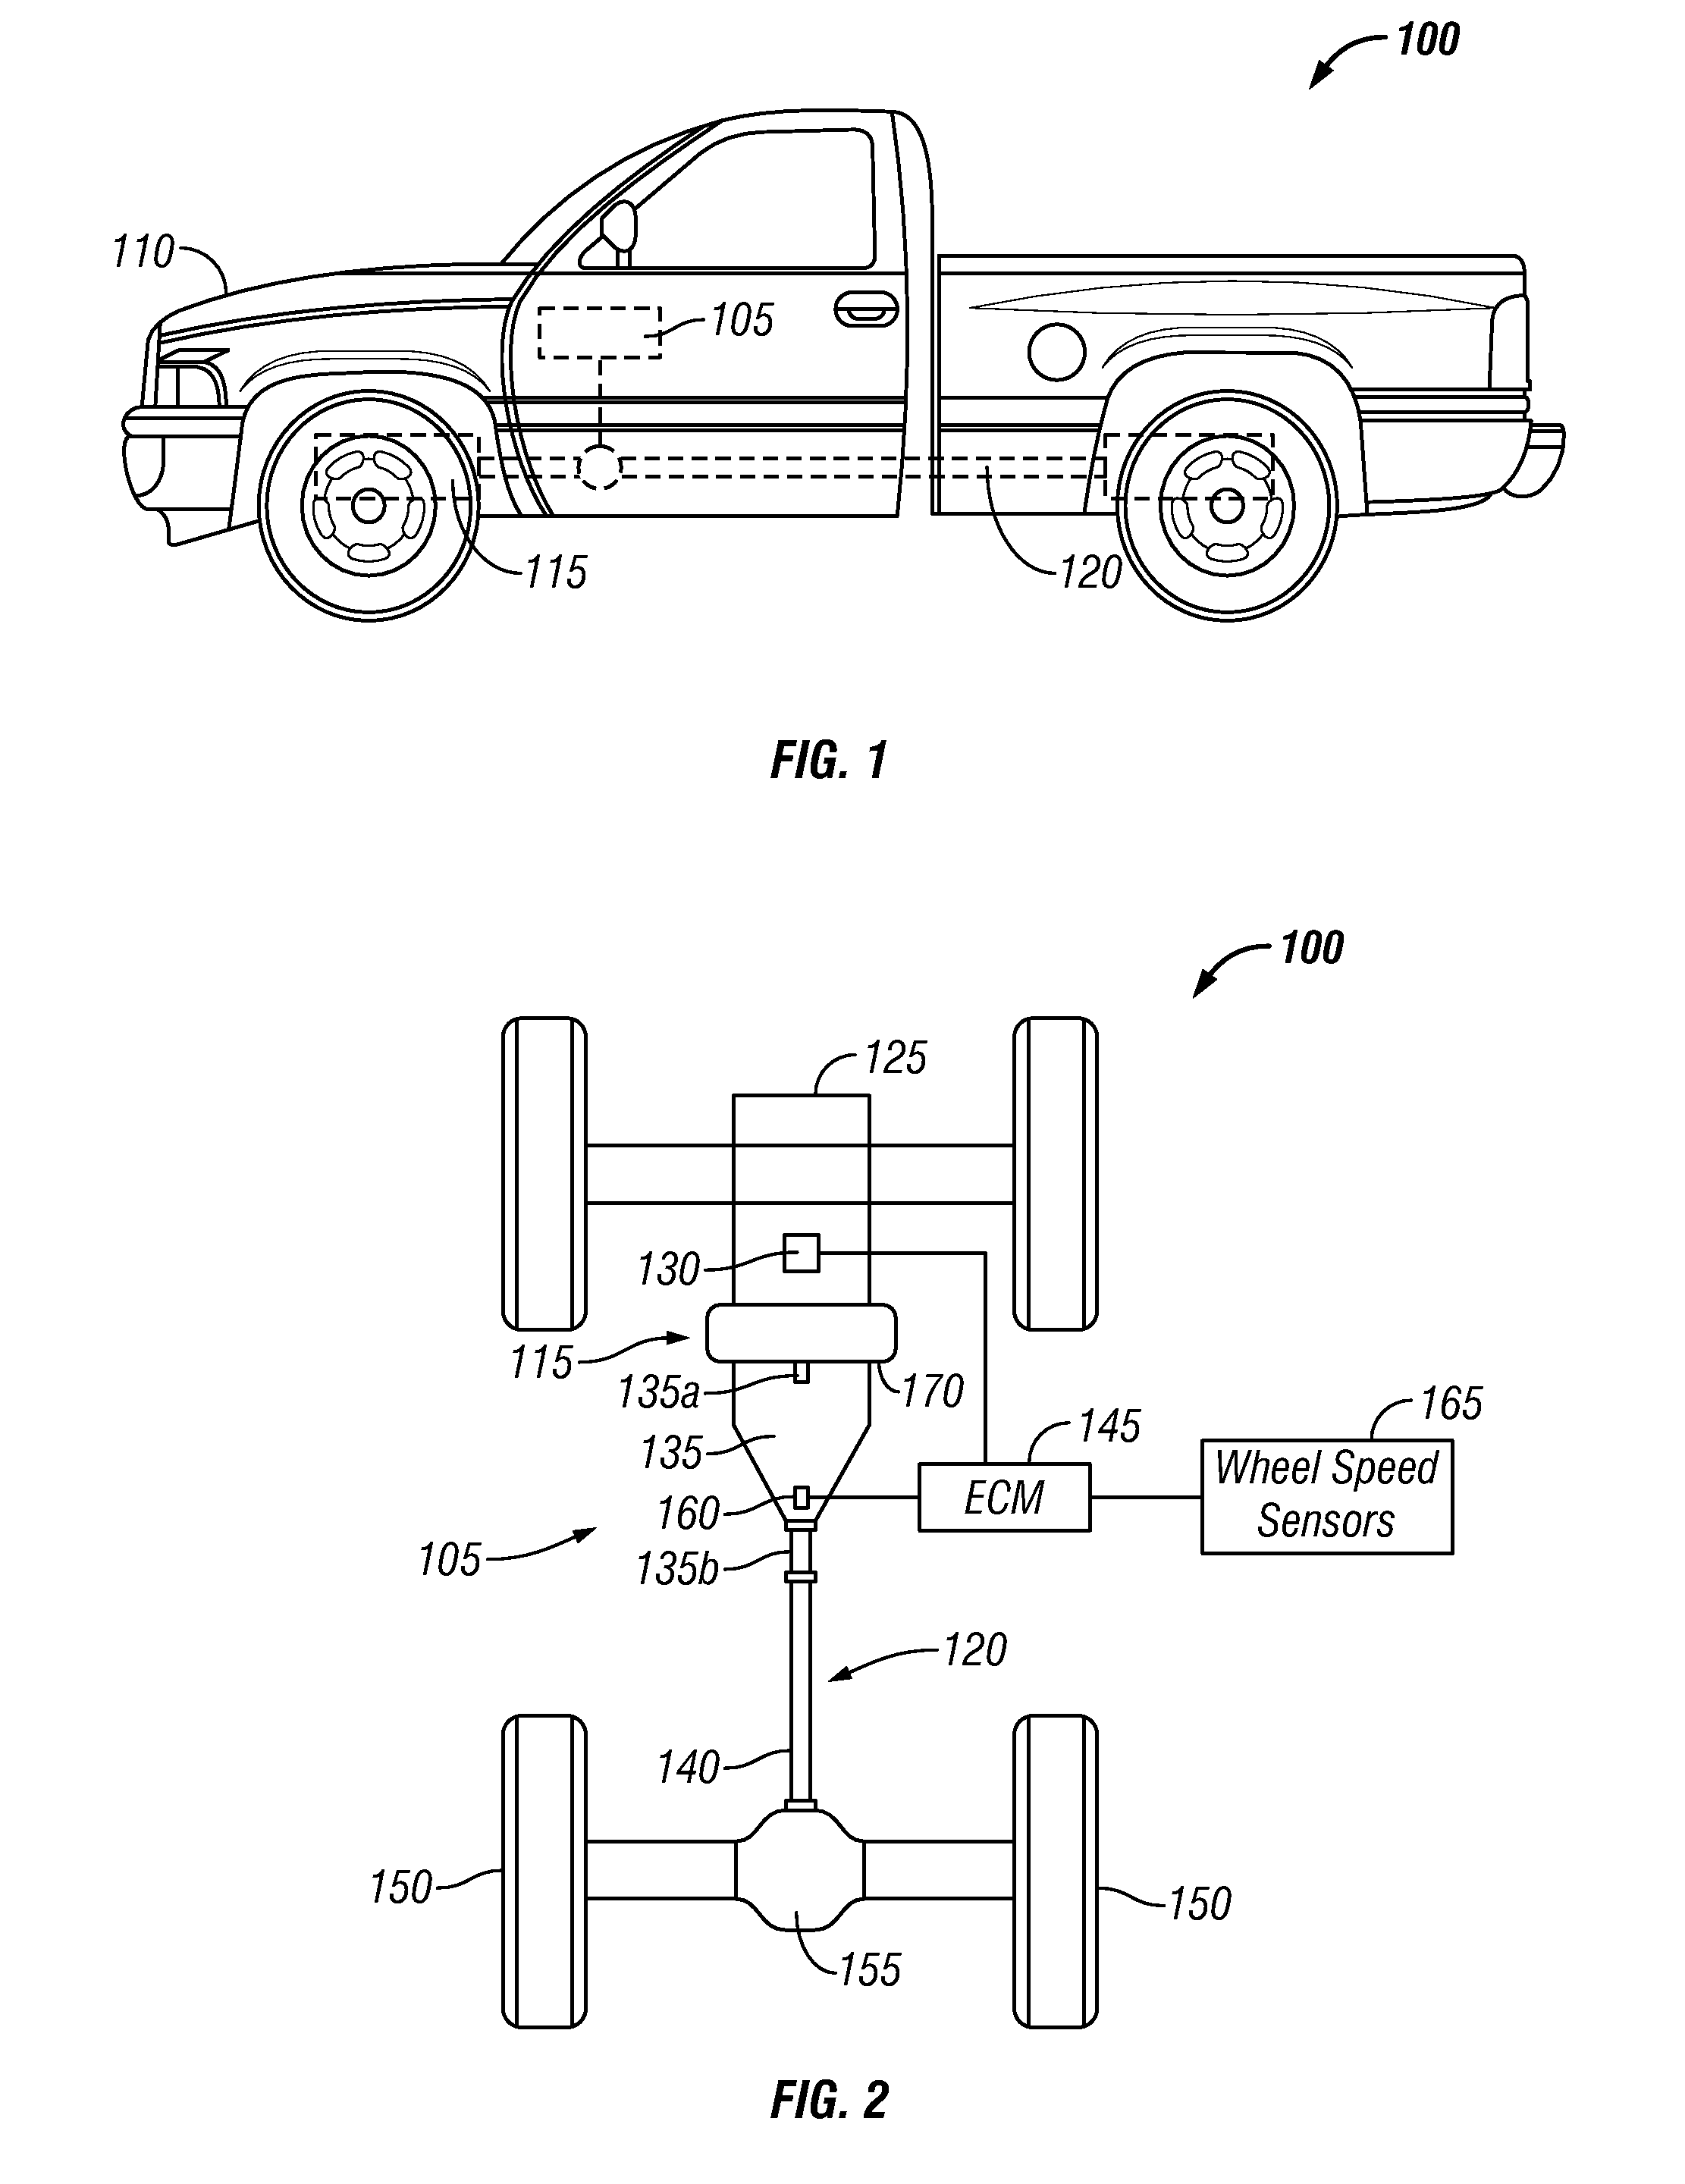 Vehicle traction control system